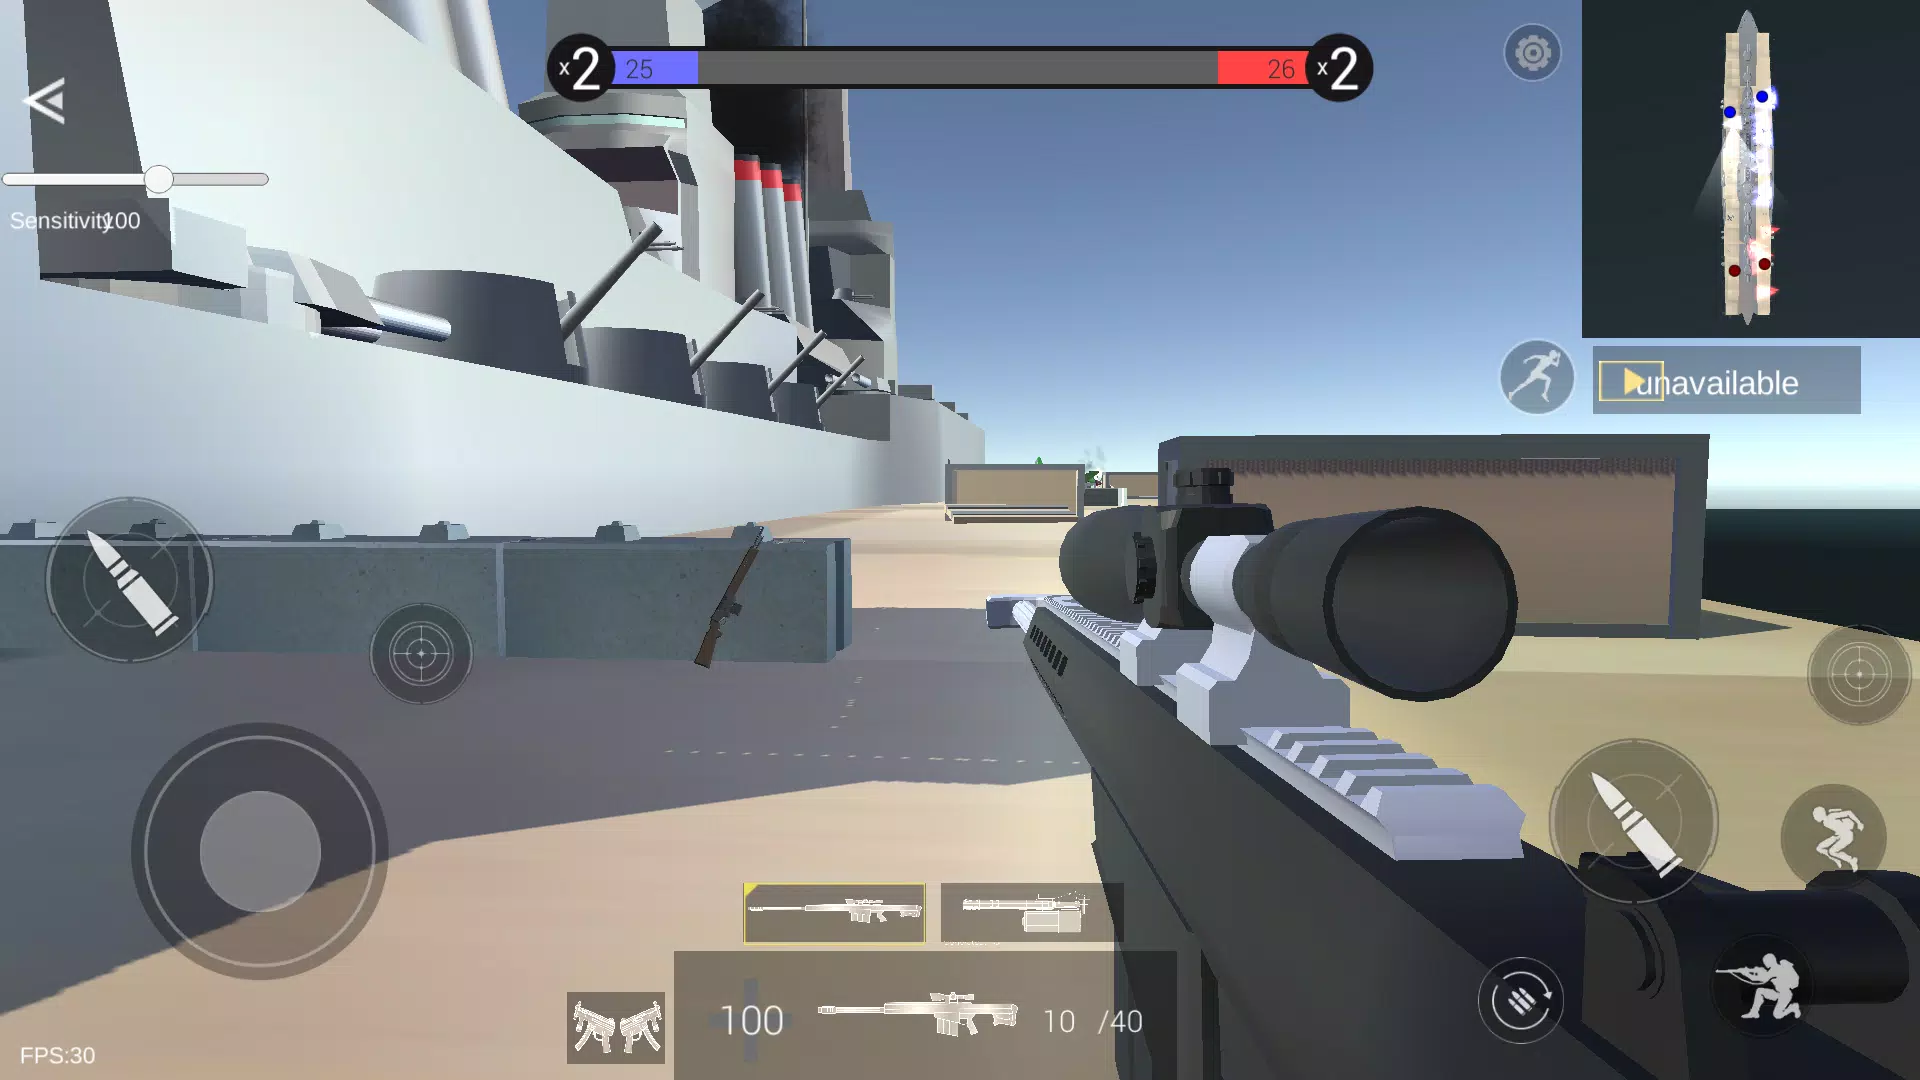 Download Battlefield Simulator android on PC